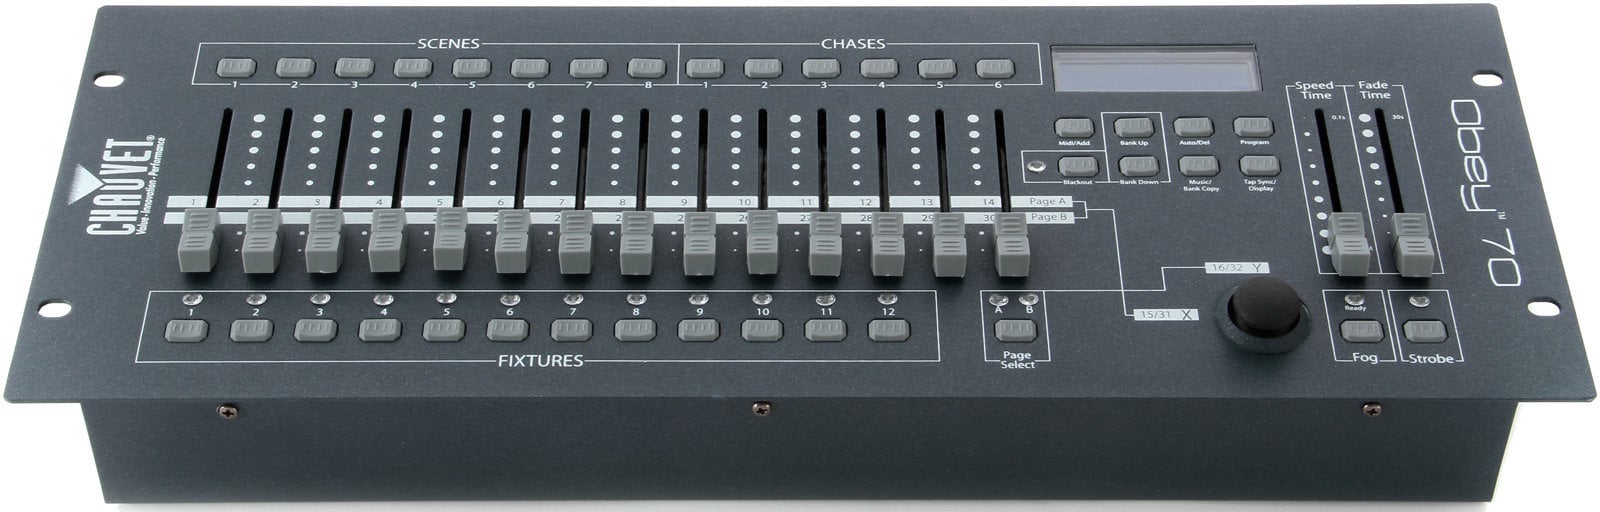 Lighting Controller, Interface Chauvet Obey 70